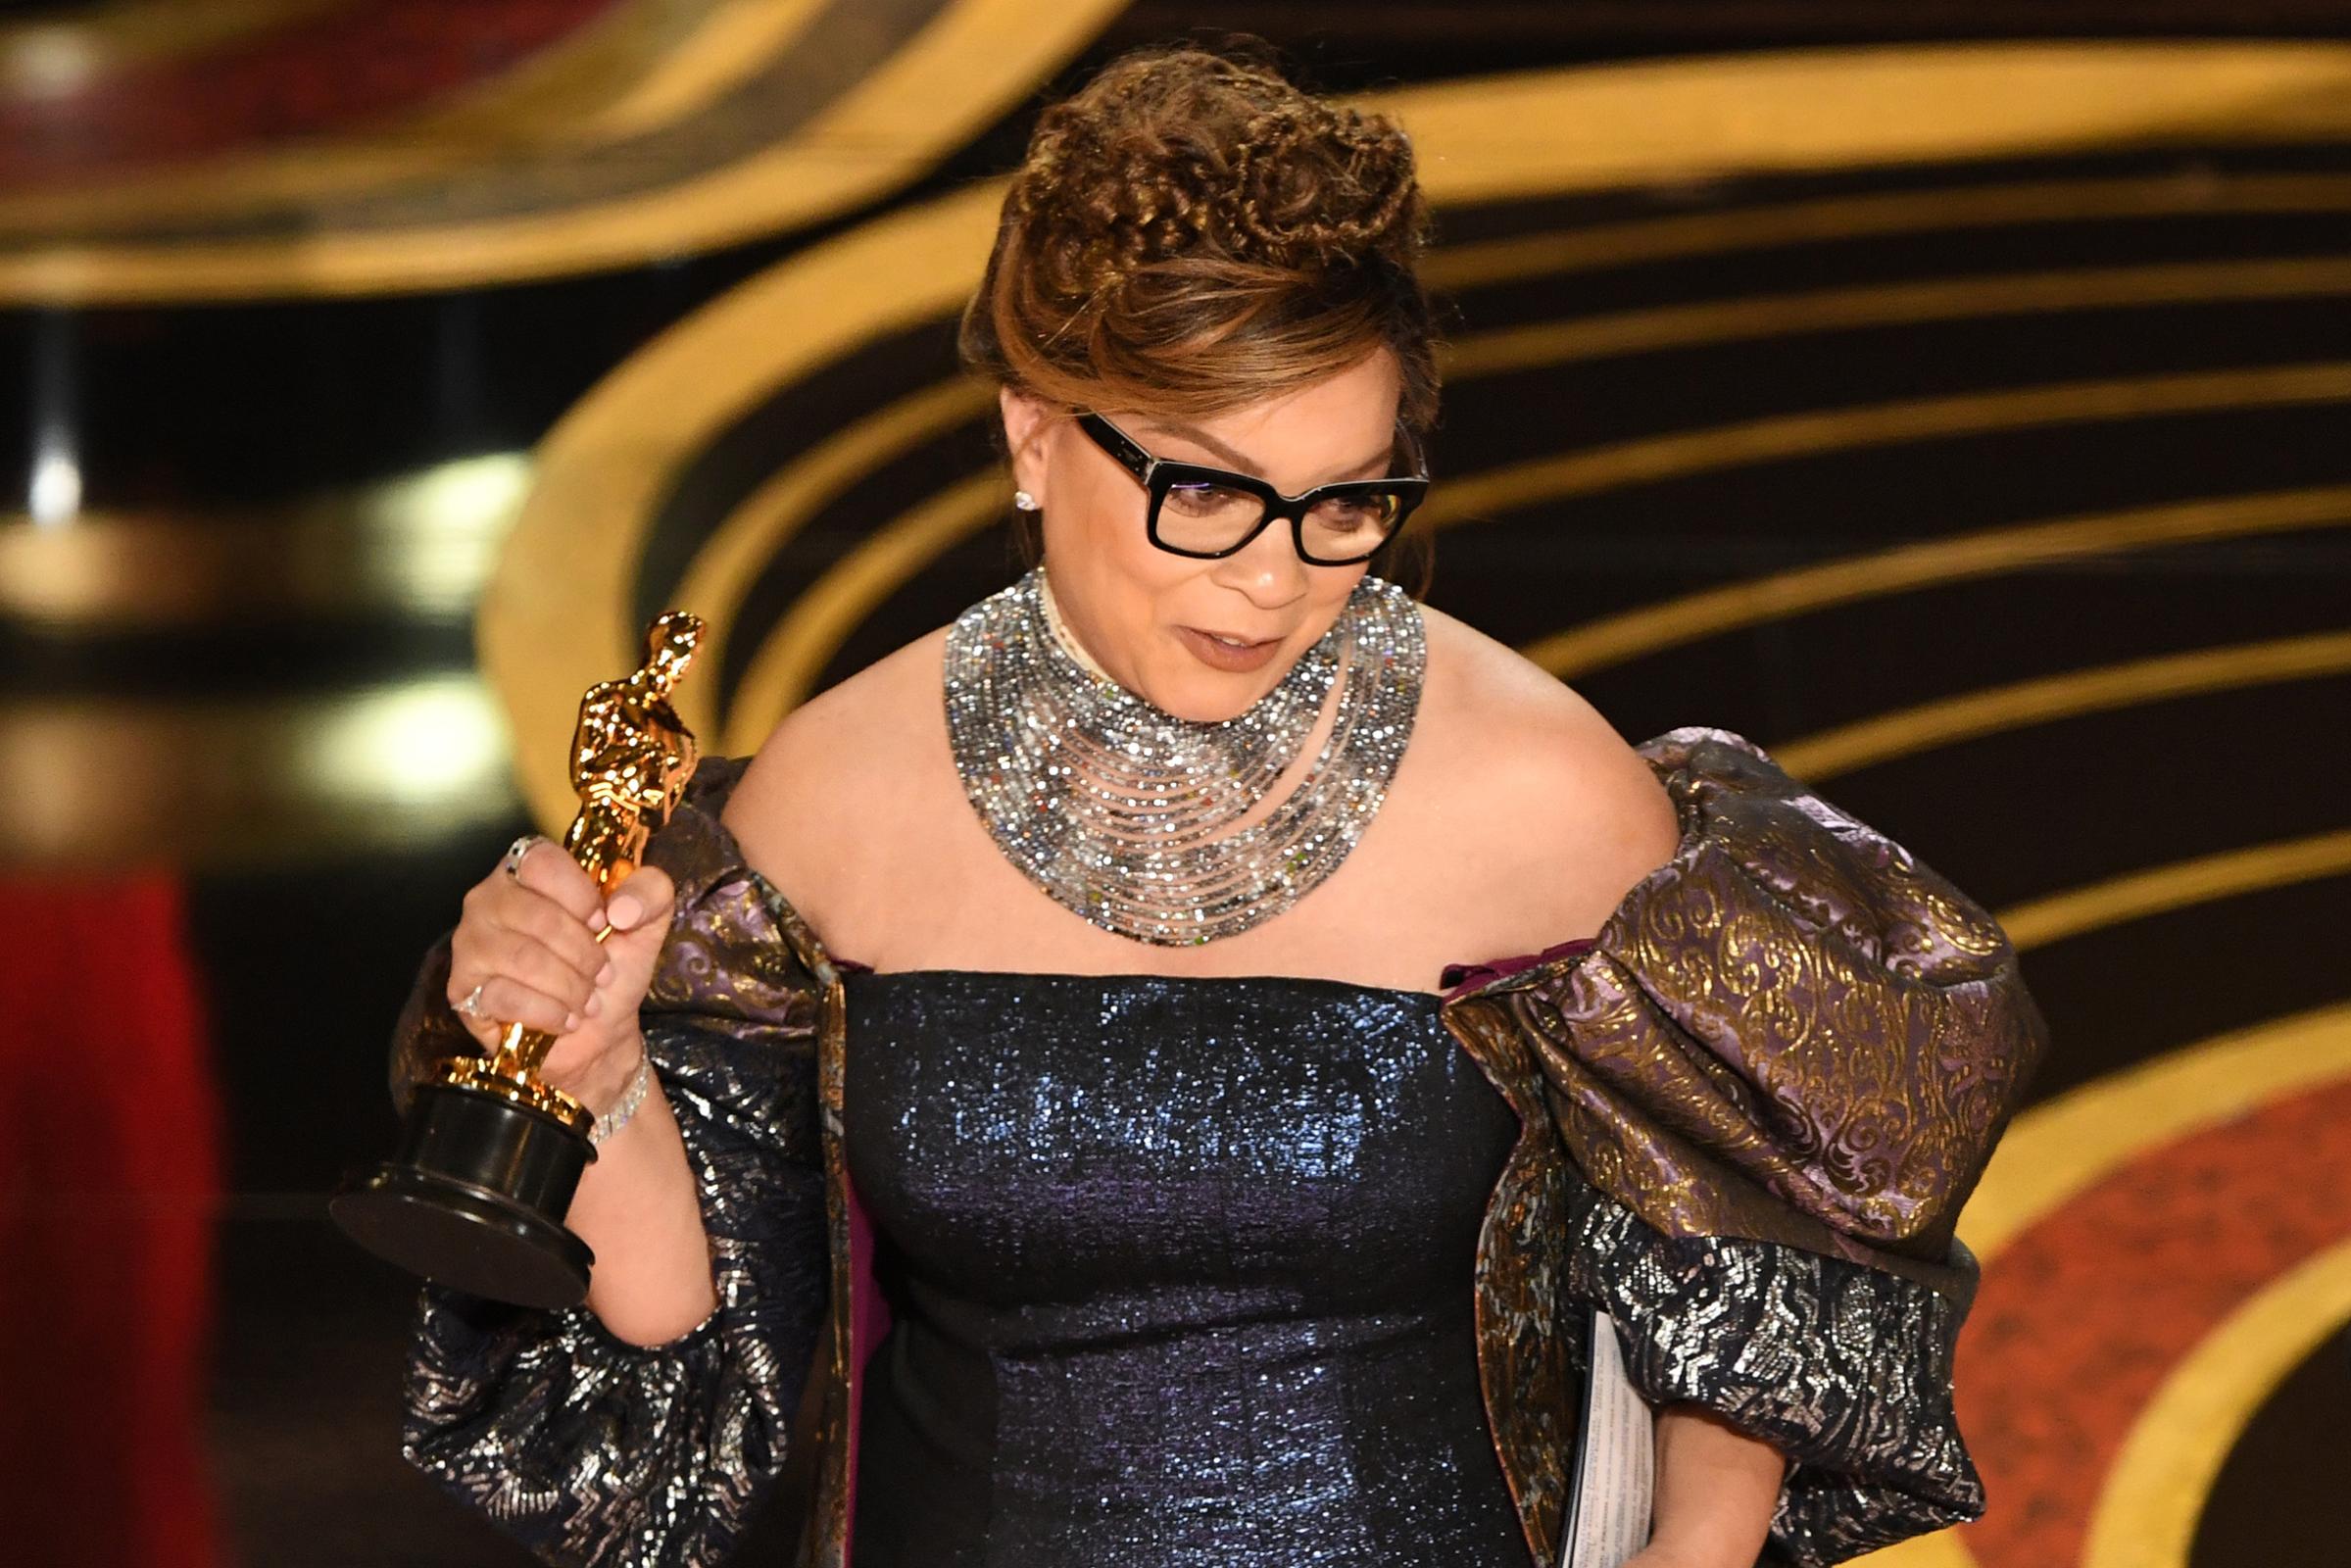 Best Costume Design nominee for "Black Panther" Ruth E. Carter accepts her Oscar during the 91st Annual Academy Awards at the Dolby Theatre in Hollywood on Feb. 24, 2019.